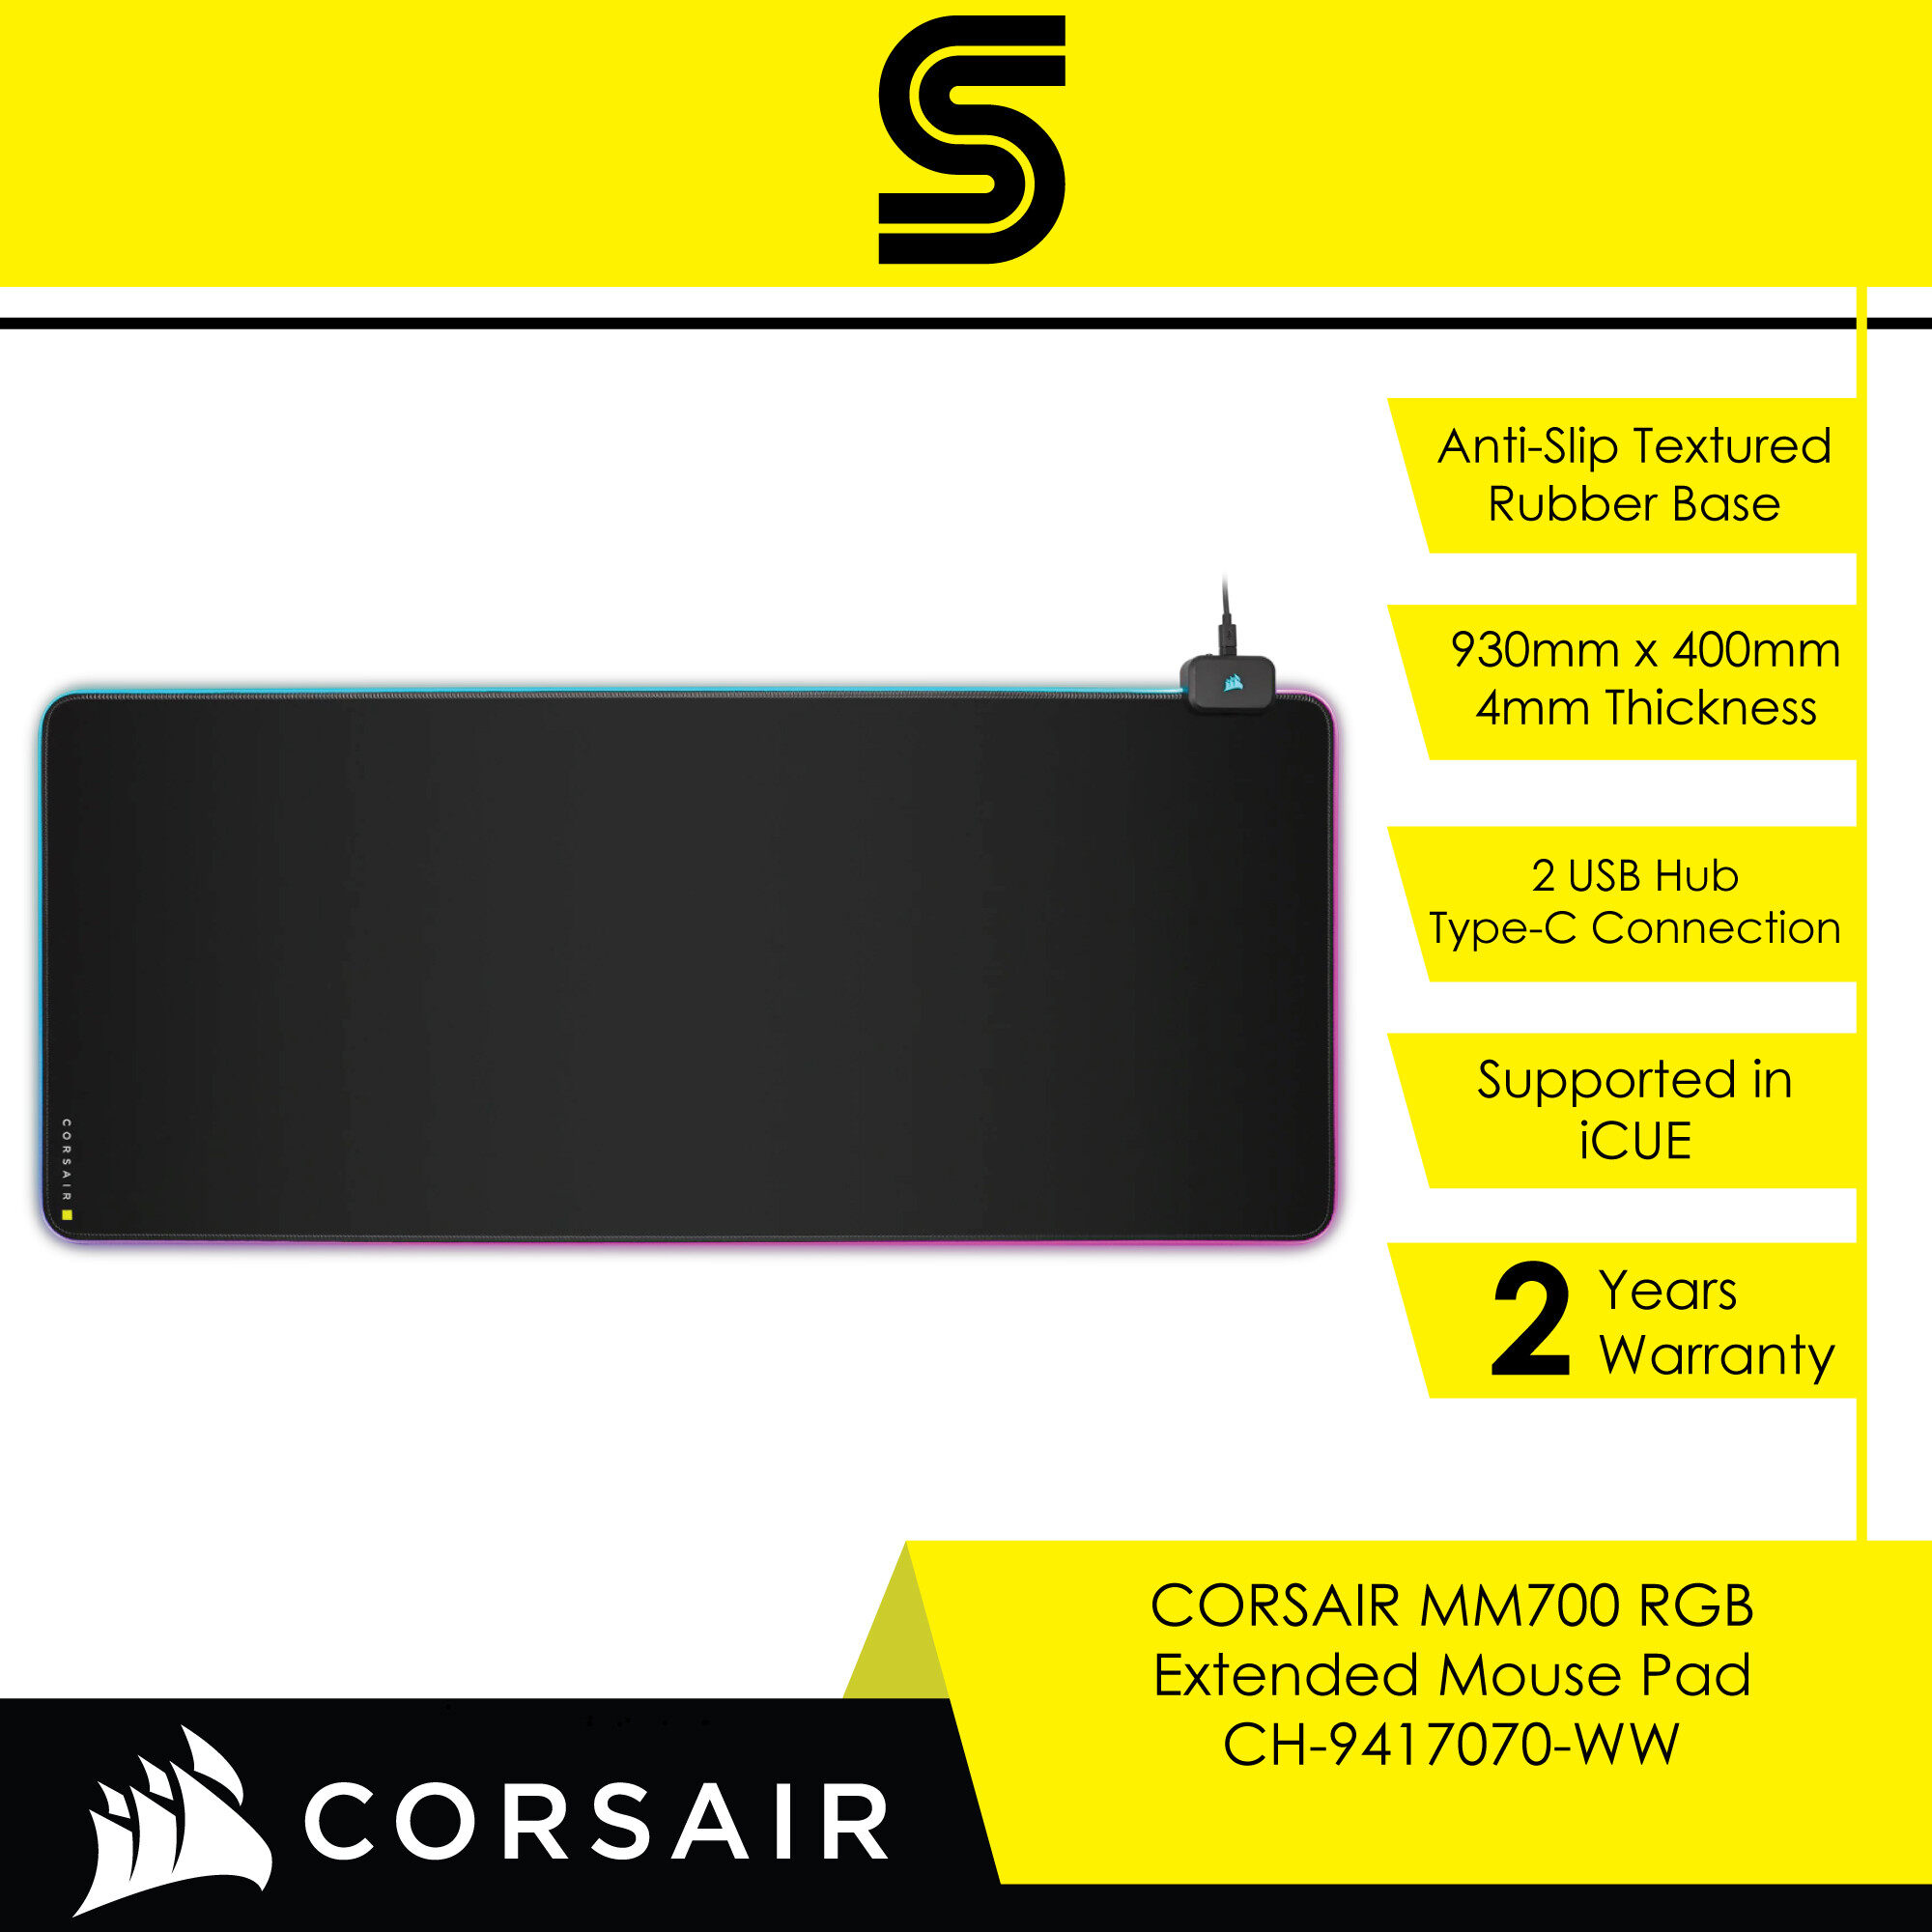 CORSAIR MM700 RGB Extended Mouse Pad - CH-9417070-WW